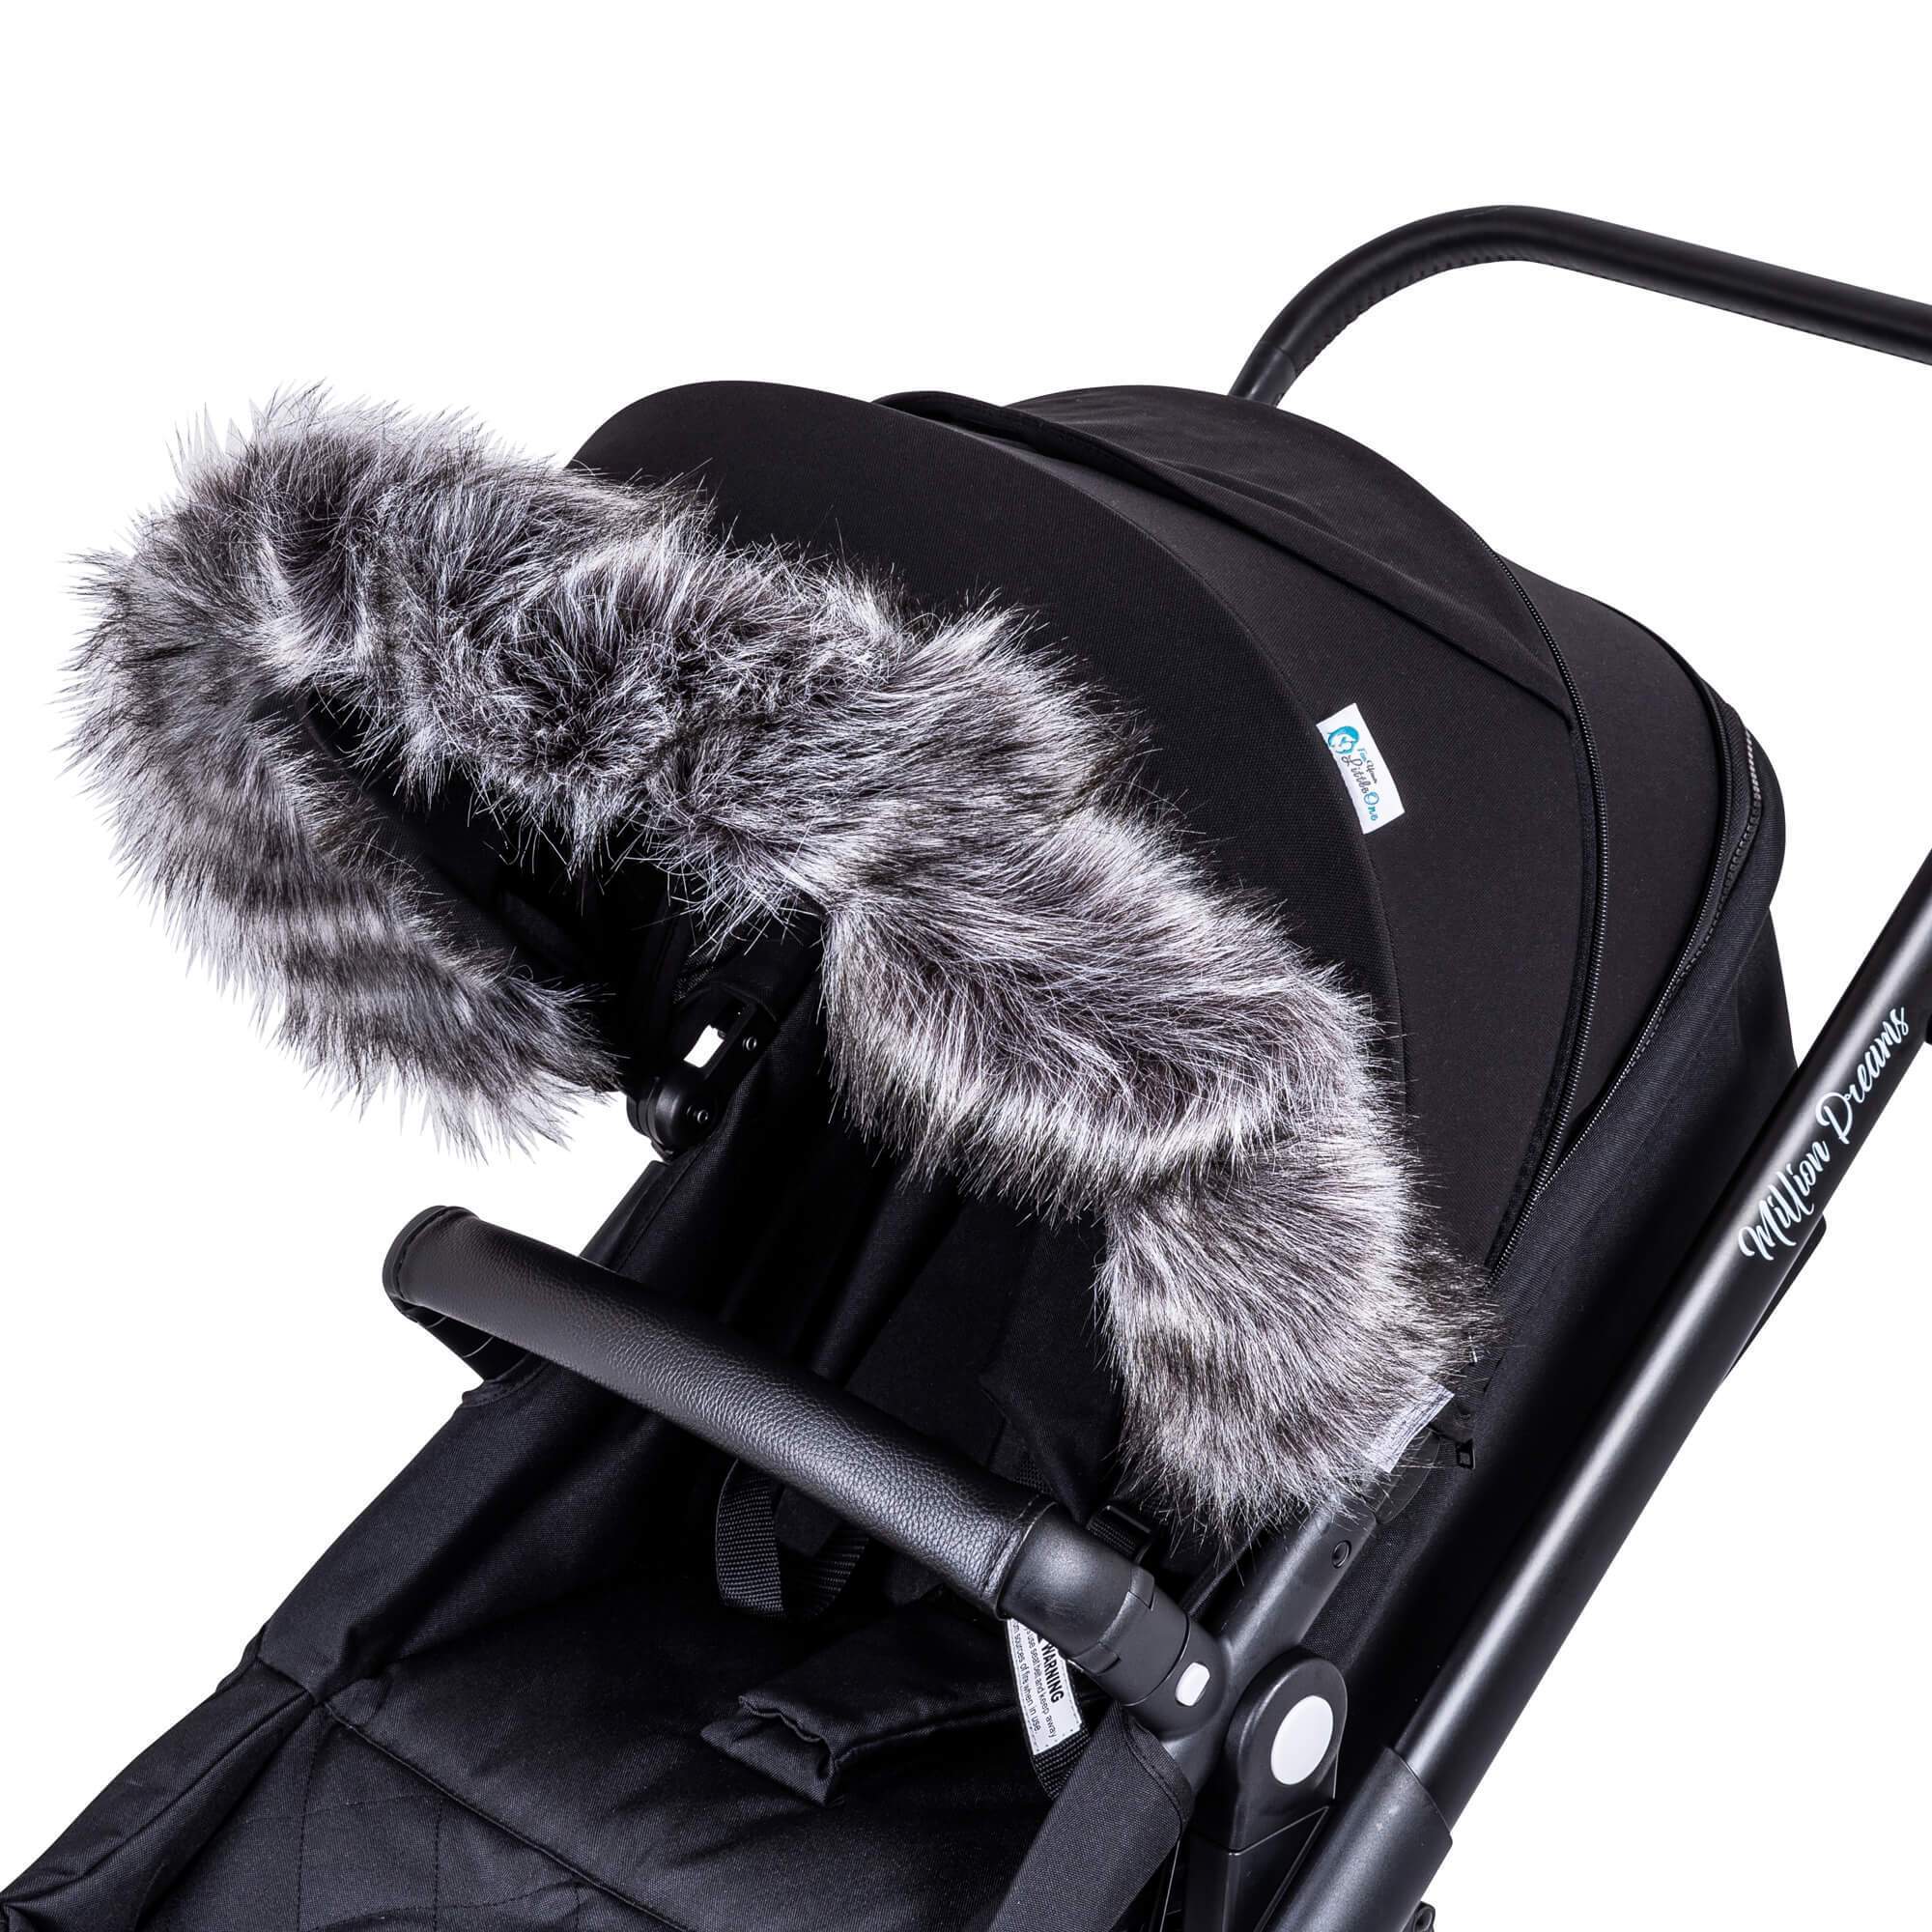 Pram Fur Hood Trim Attachment for Pushchair Compatible with Maclaren - For Your Little One